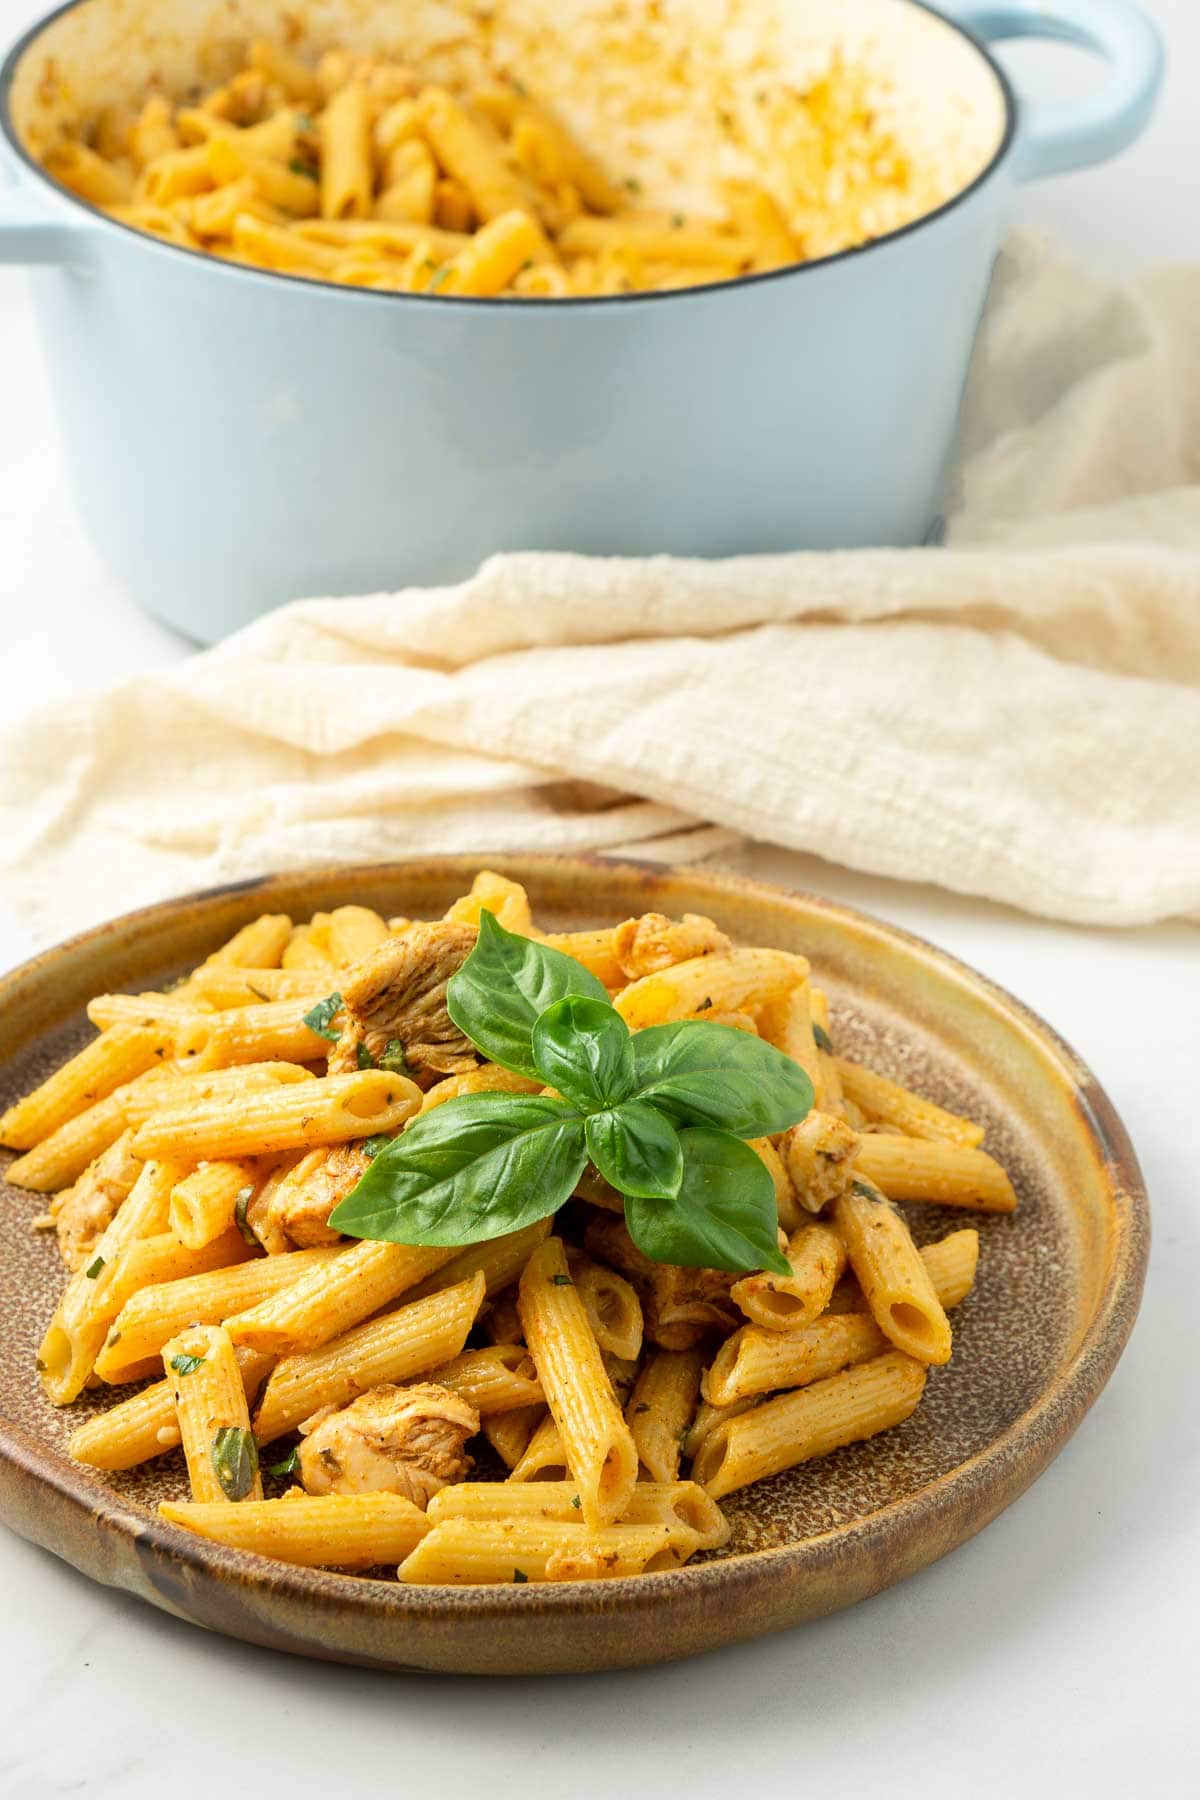 Cajun chicken pasta served on a plate with fresh basil and the large pot in the background.